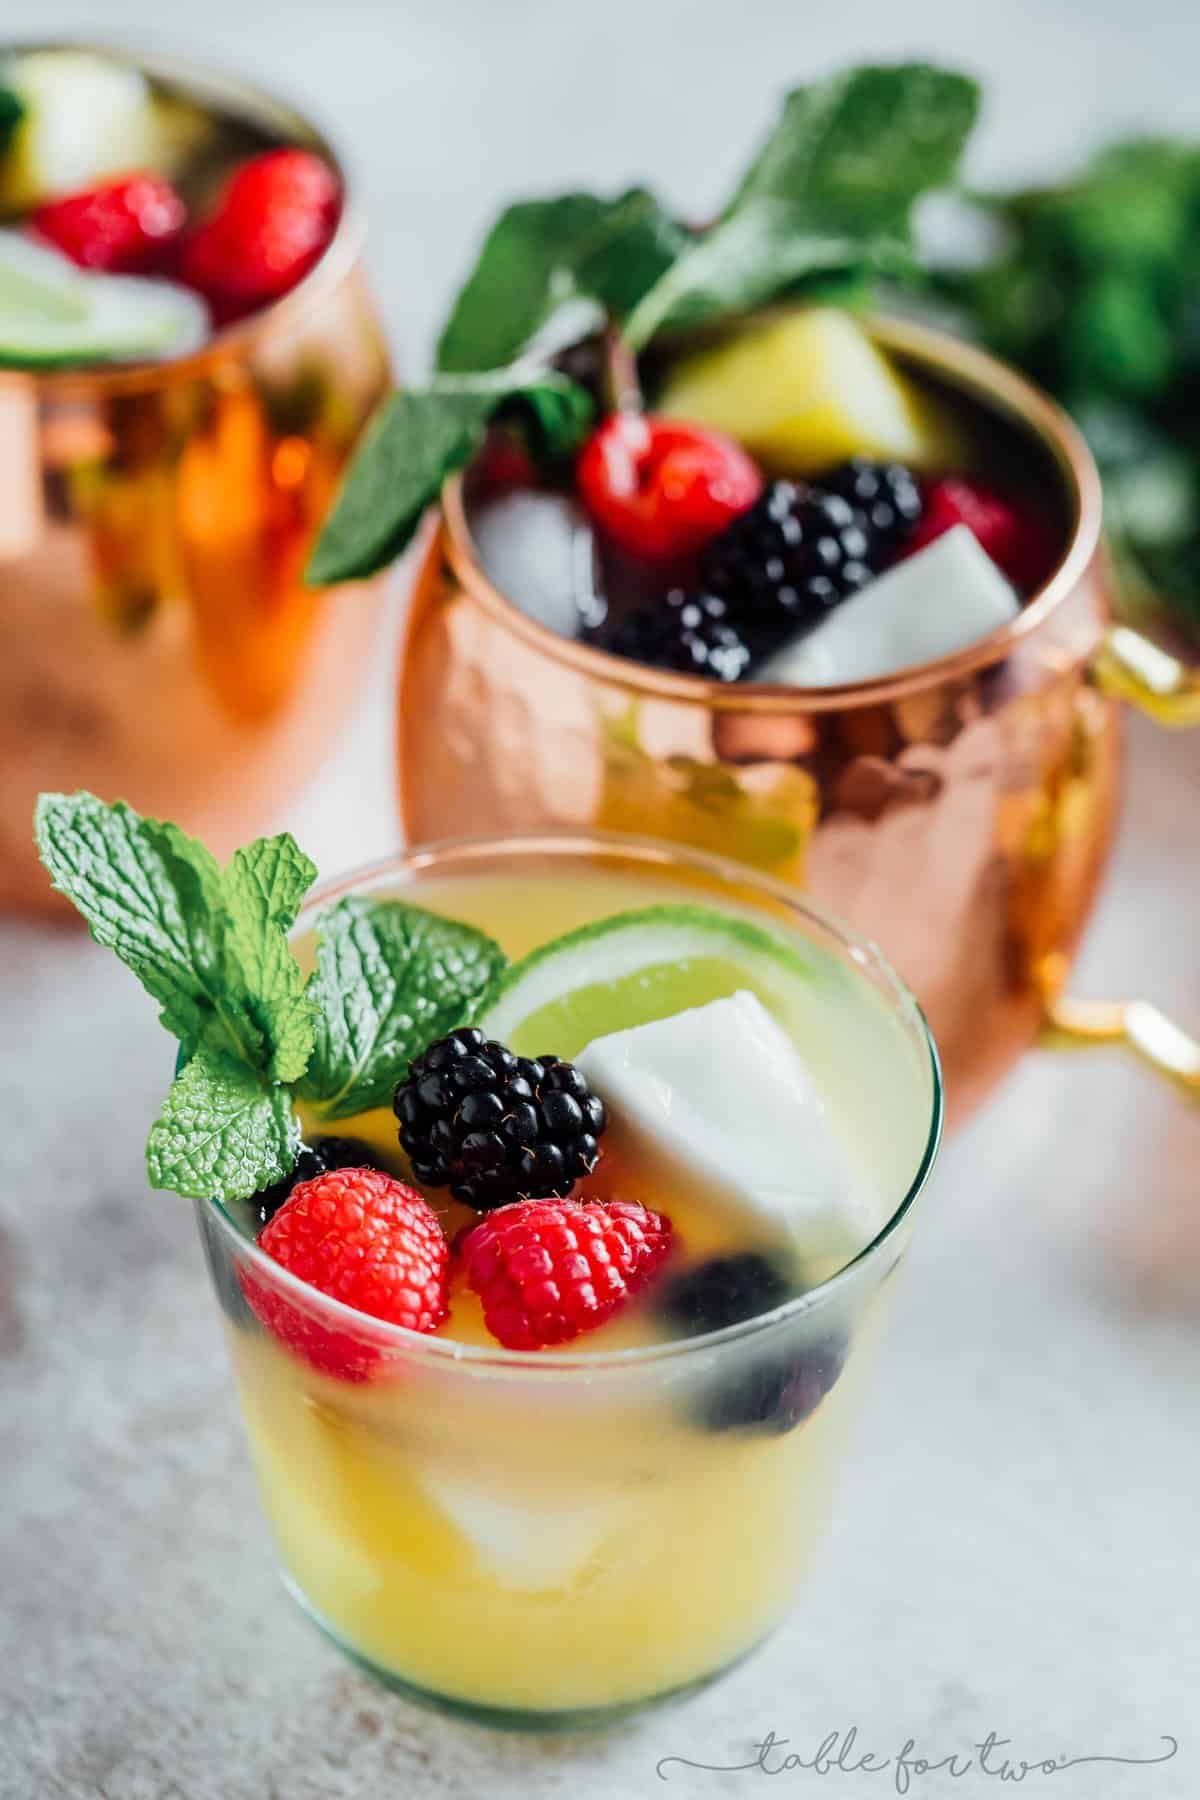 It's like being on an island in paradise when you've got yourself sipping on this tropical Moscow mule! The fruitier twist on the classic Moscow mule!